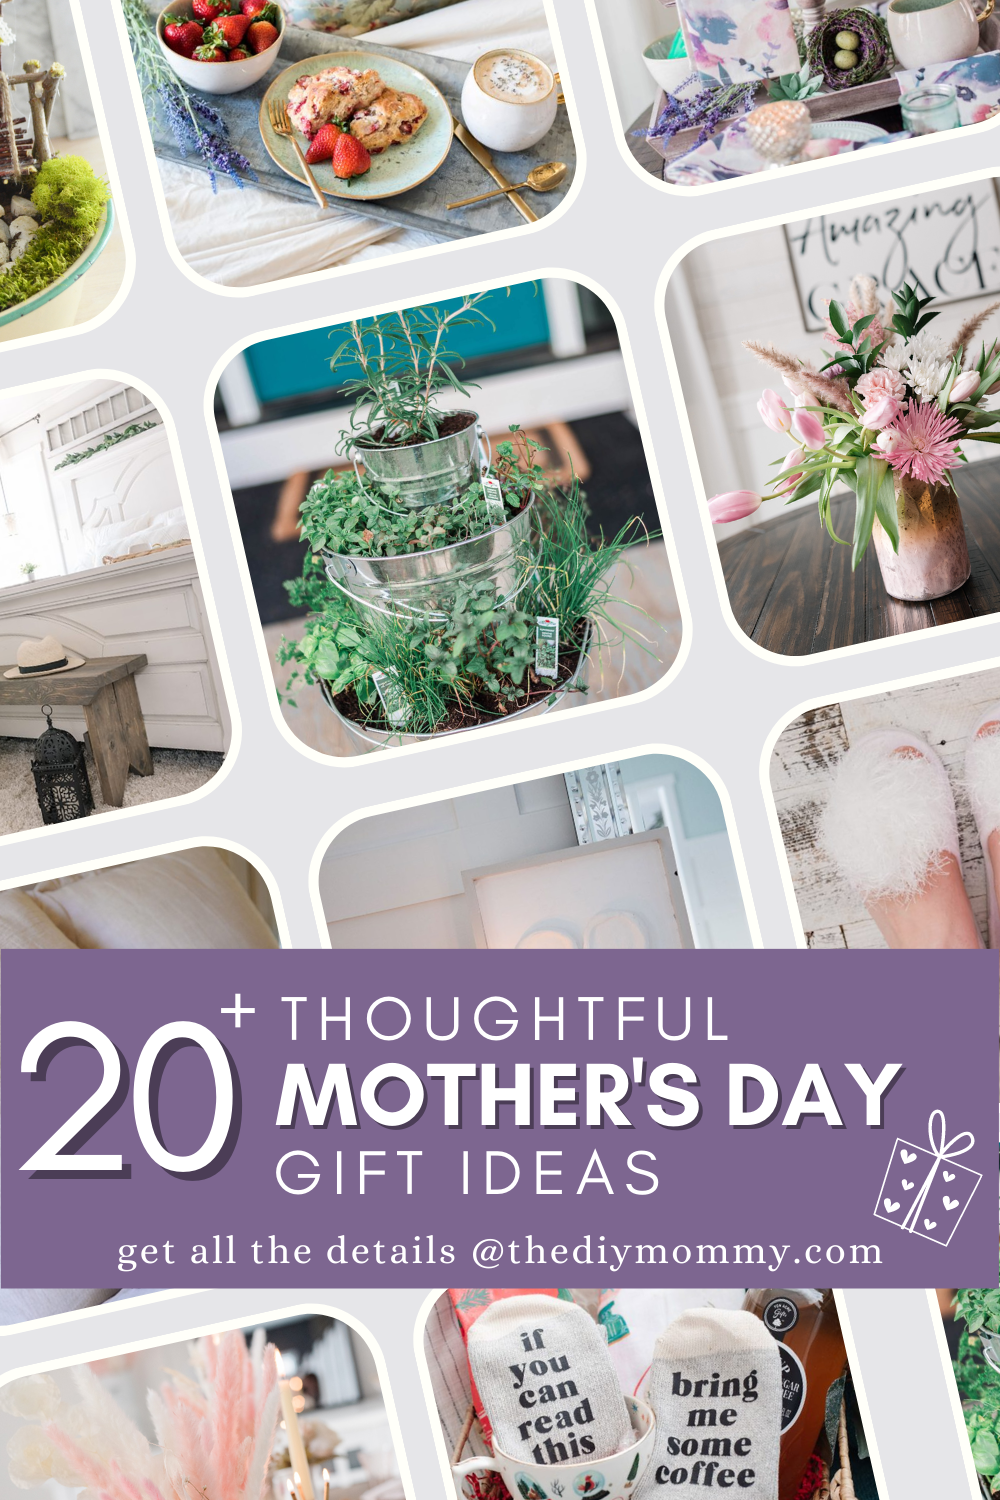 Thoughtful Mother's Day gift ideas can make all the difference, and so many options are available! Here are 22 that are easy and budget friendly!